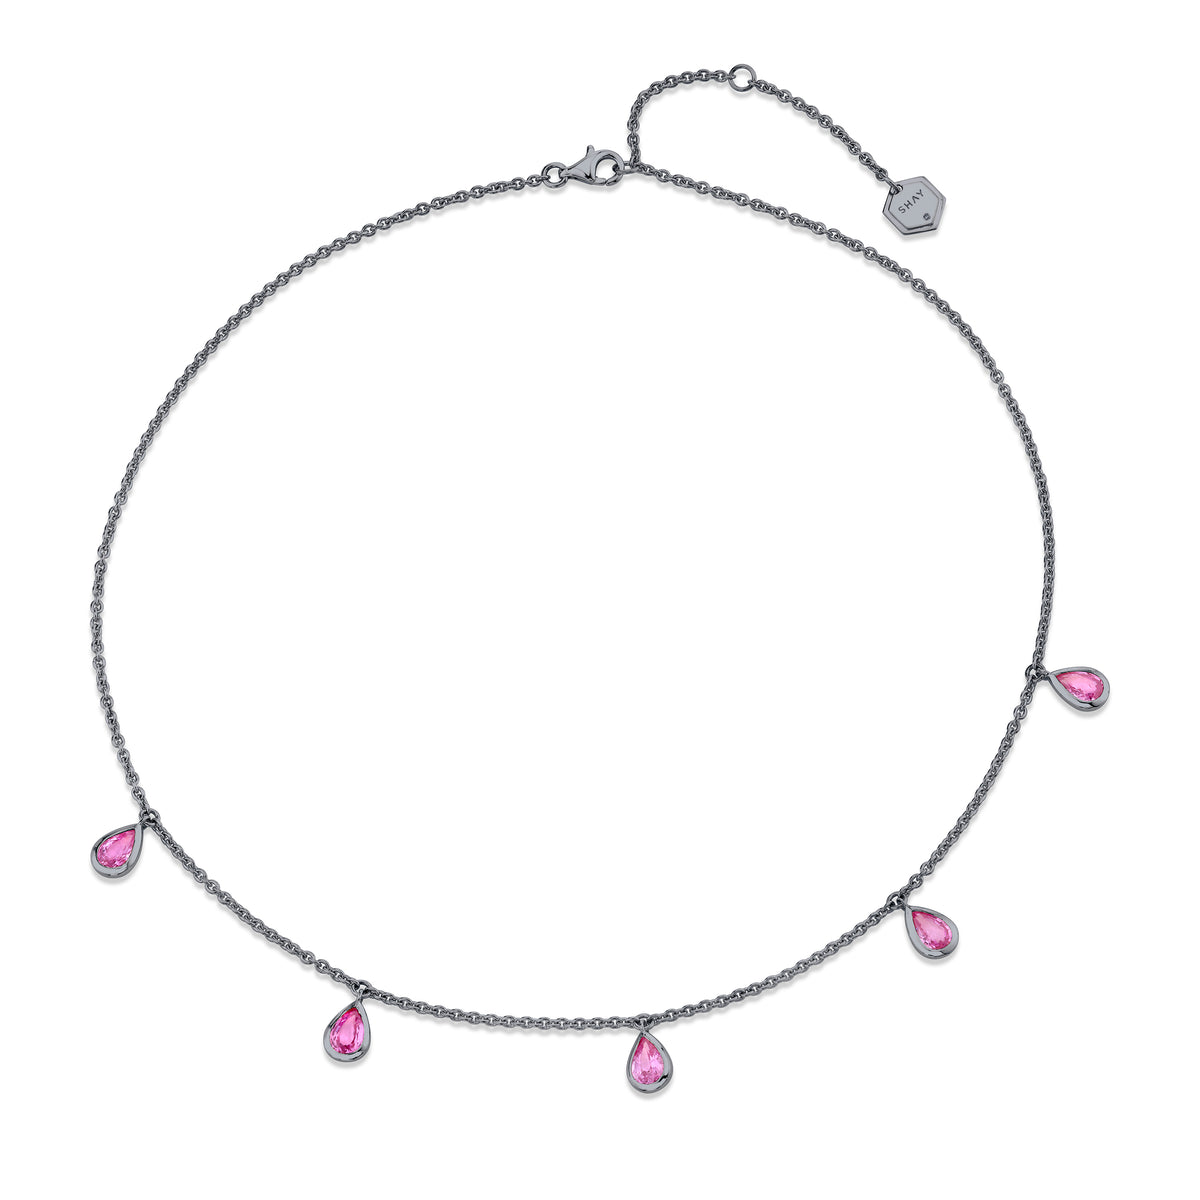 PINK SAPPHIRE 5 PEAR DROP NECKLACE